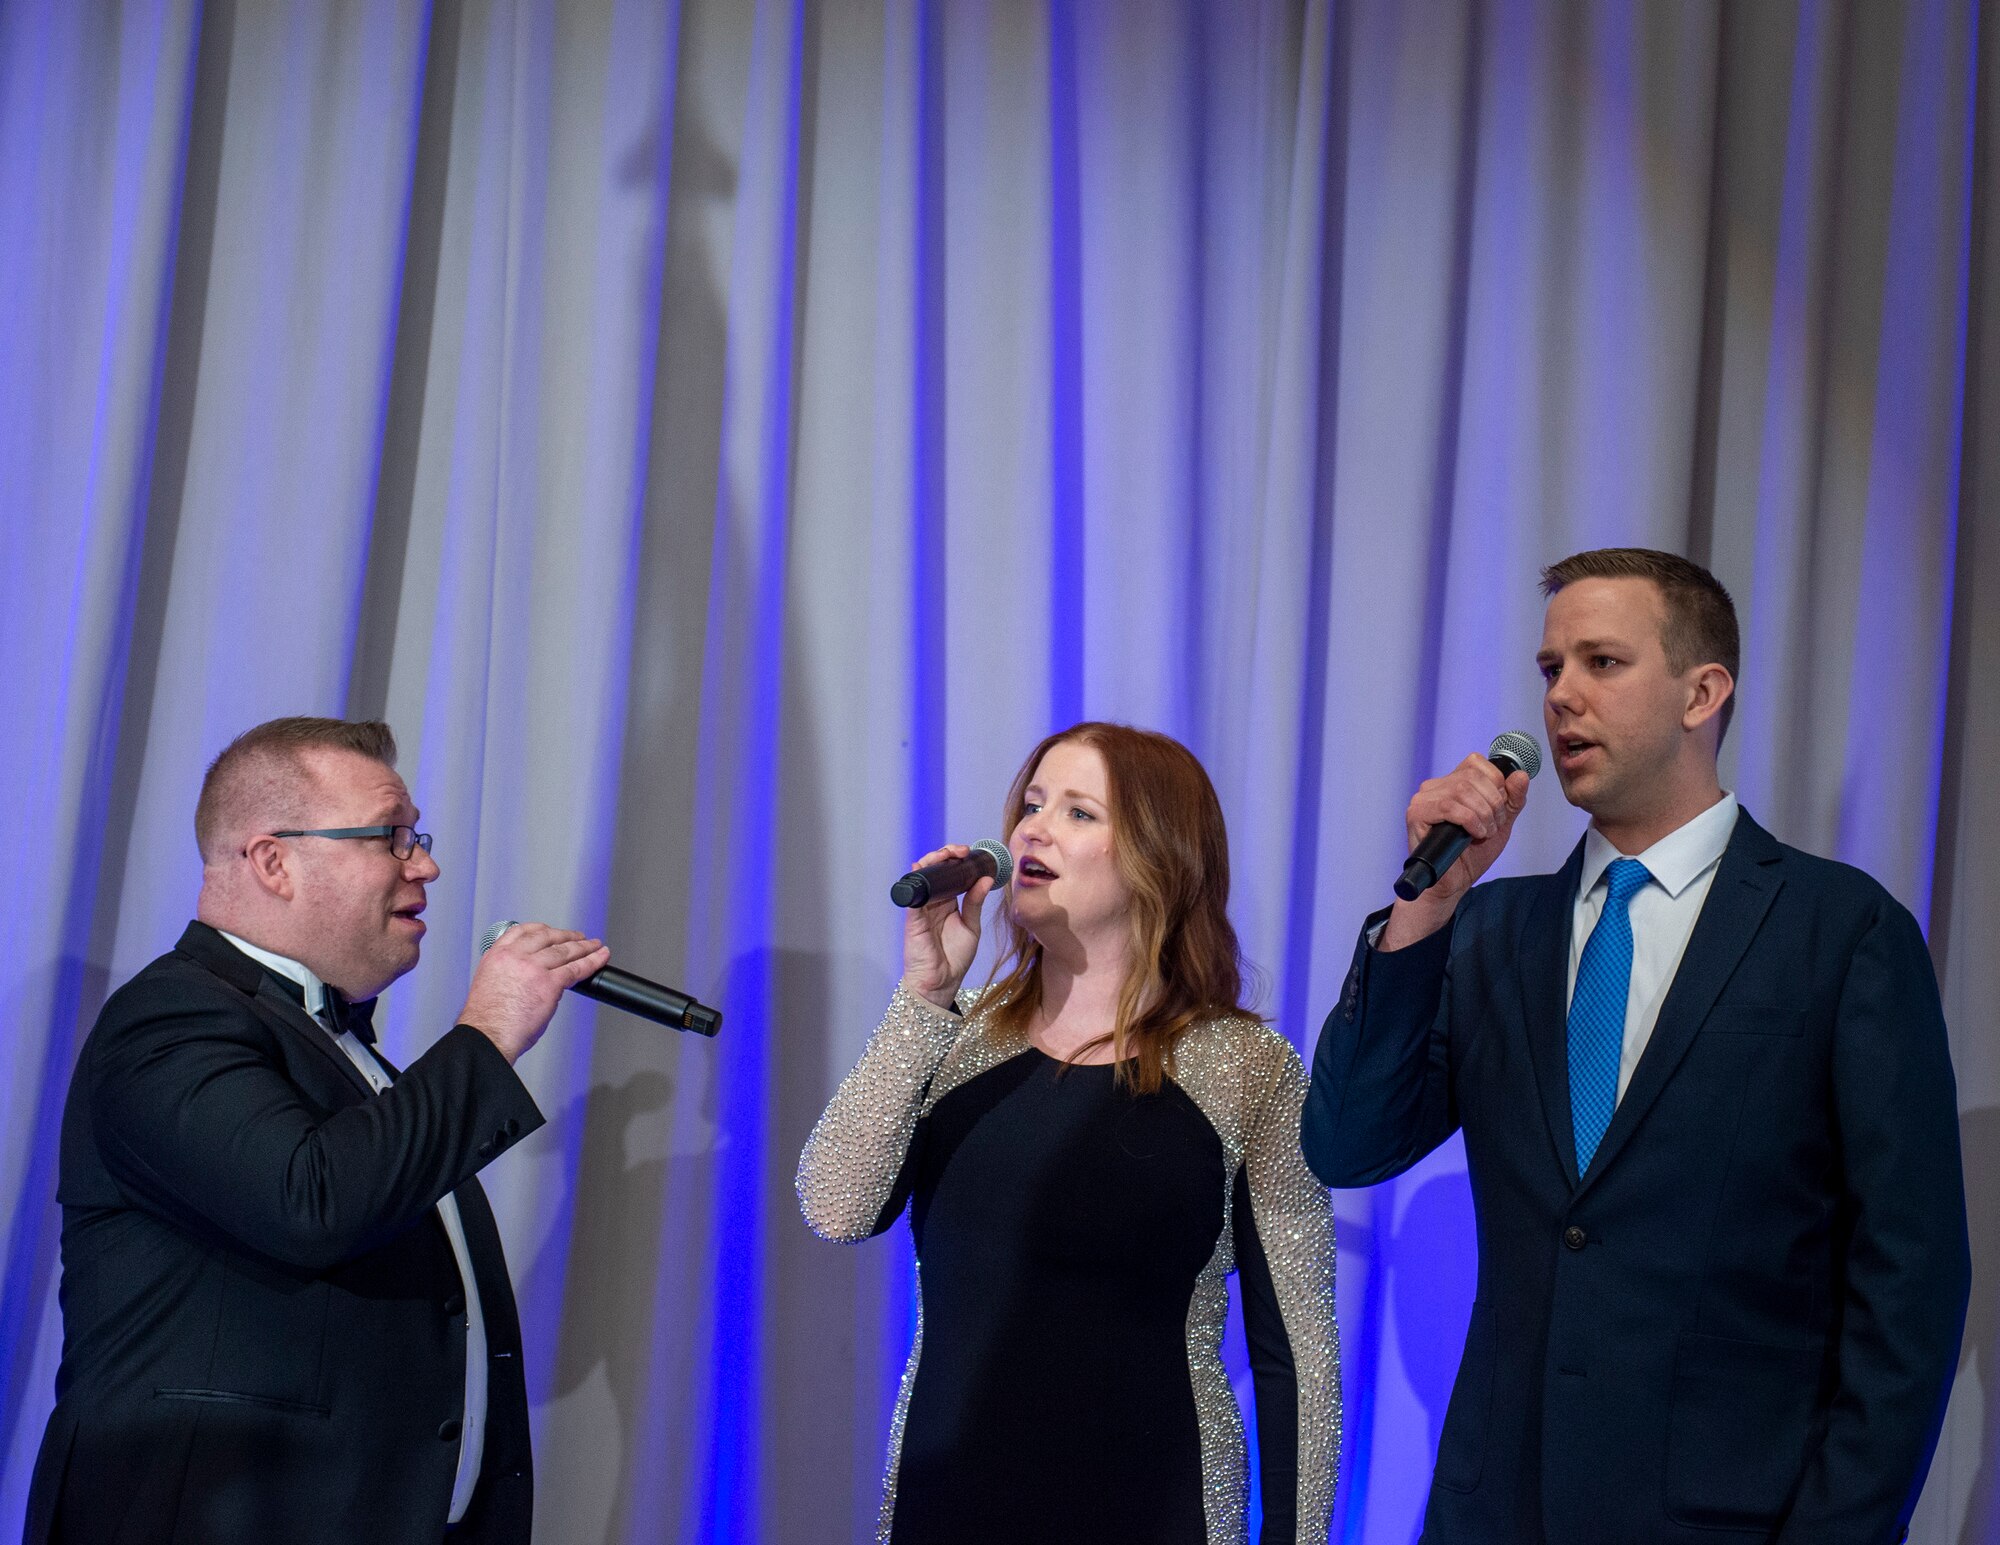 U.S. Air Force Master Sgt.’s Ryan Ringwelski, left, and Jessica Lewellen, center, and Tech. Sgt. James Taylor, right, 133rd Airlift Wing, sing the national anthem in St. Paul, Minn., March 19, 2022.